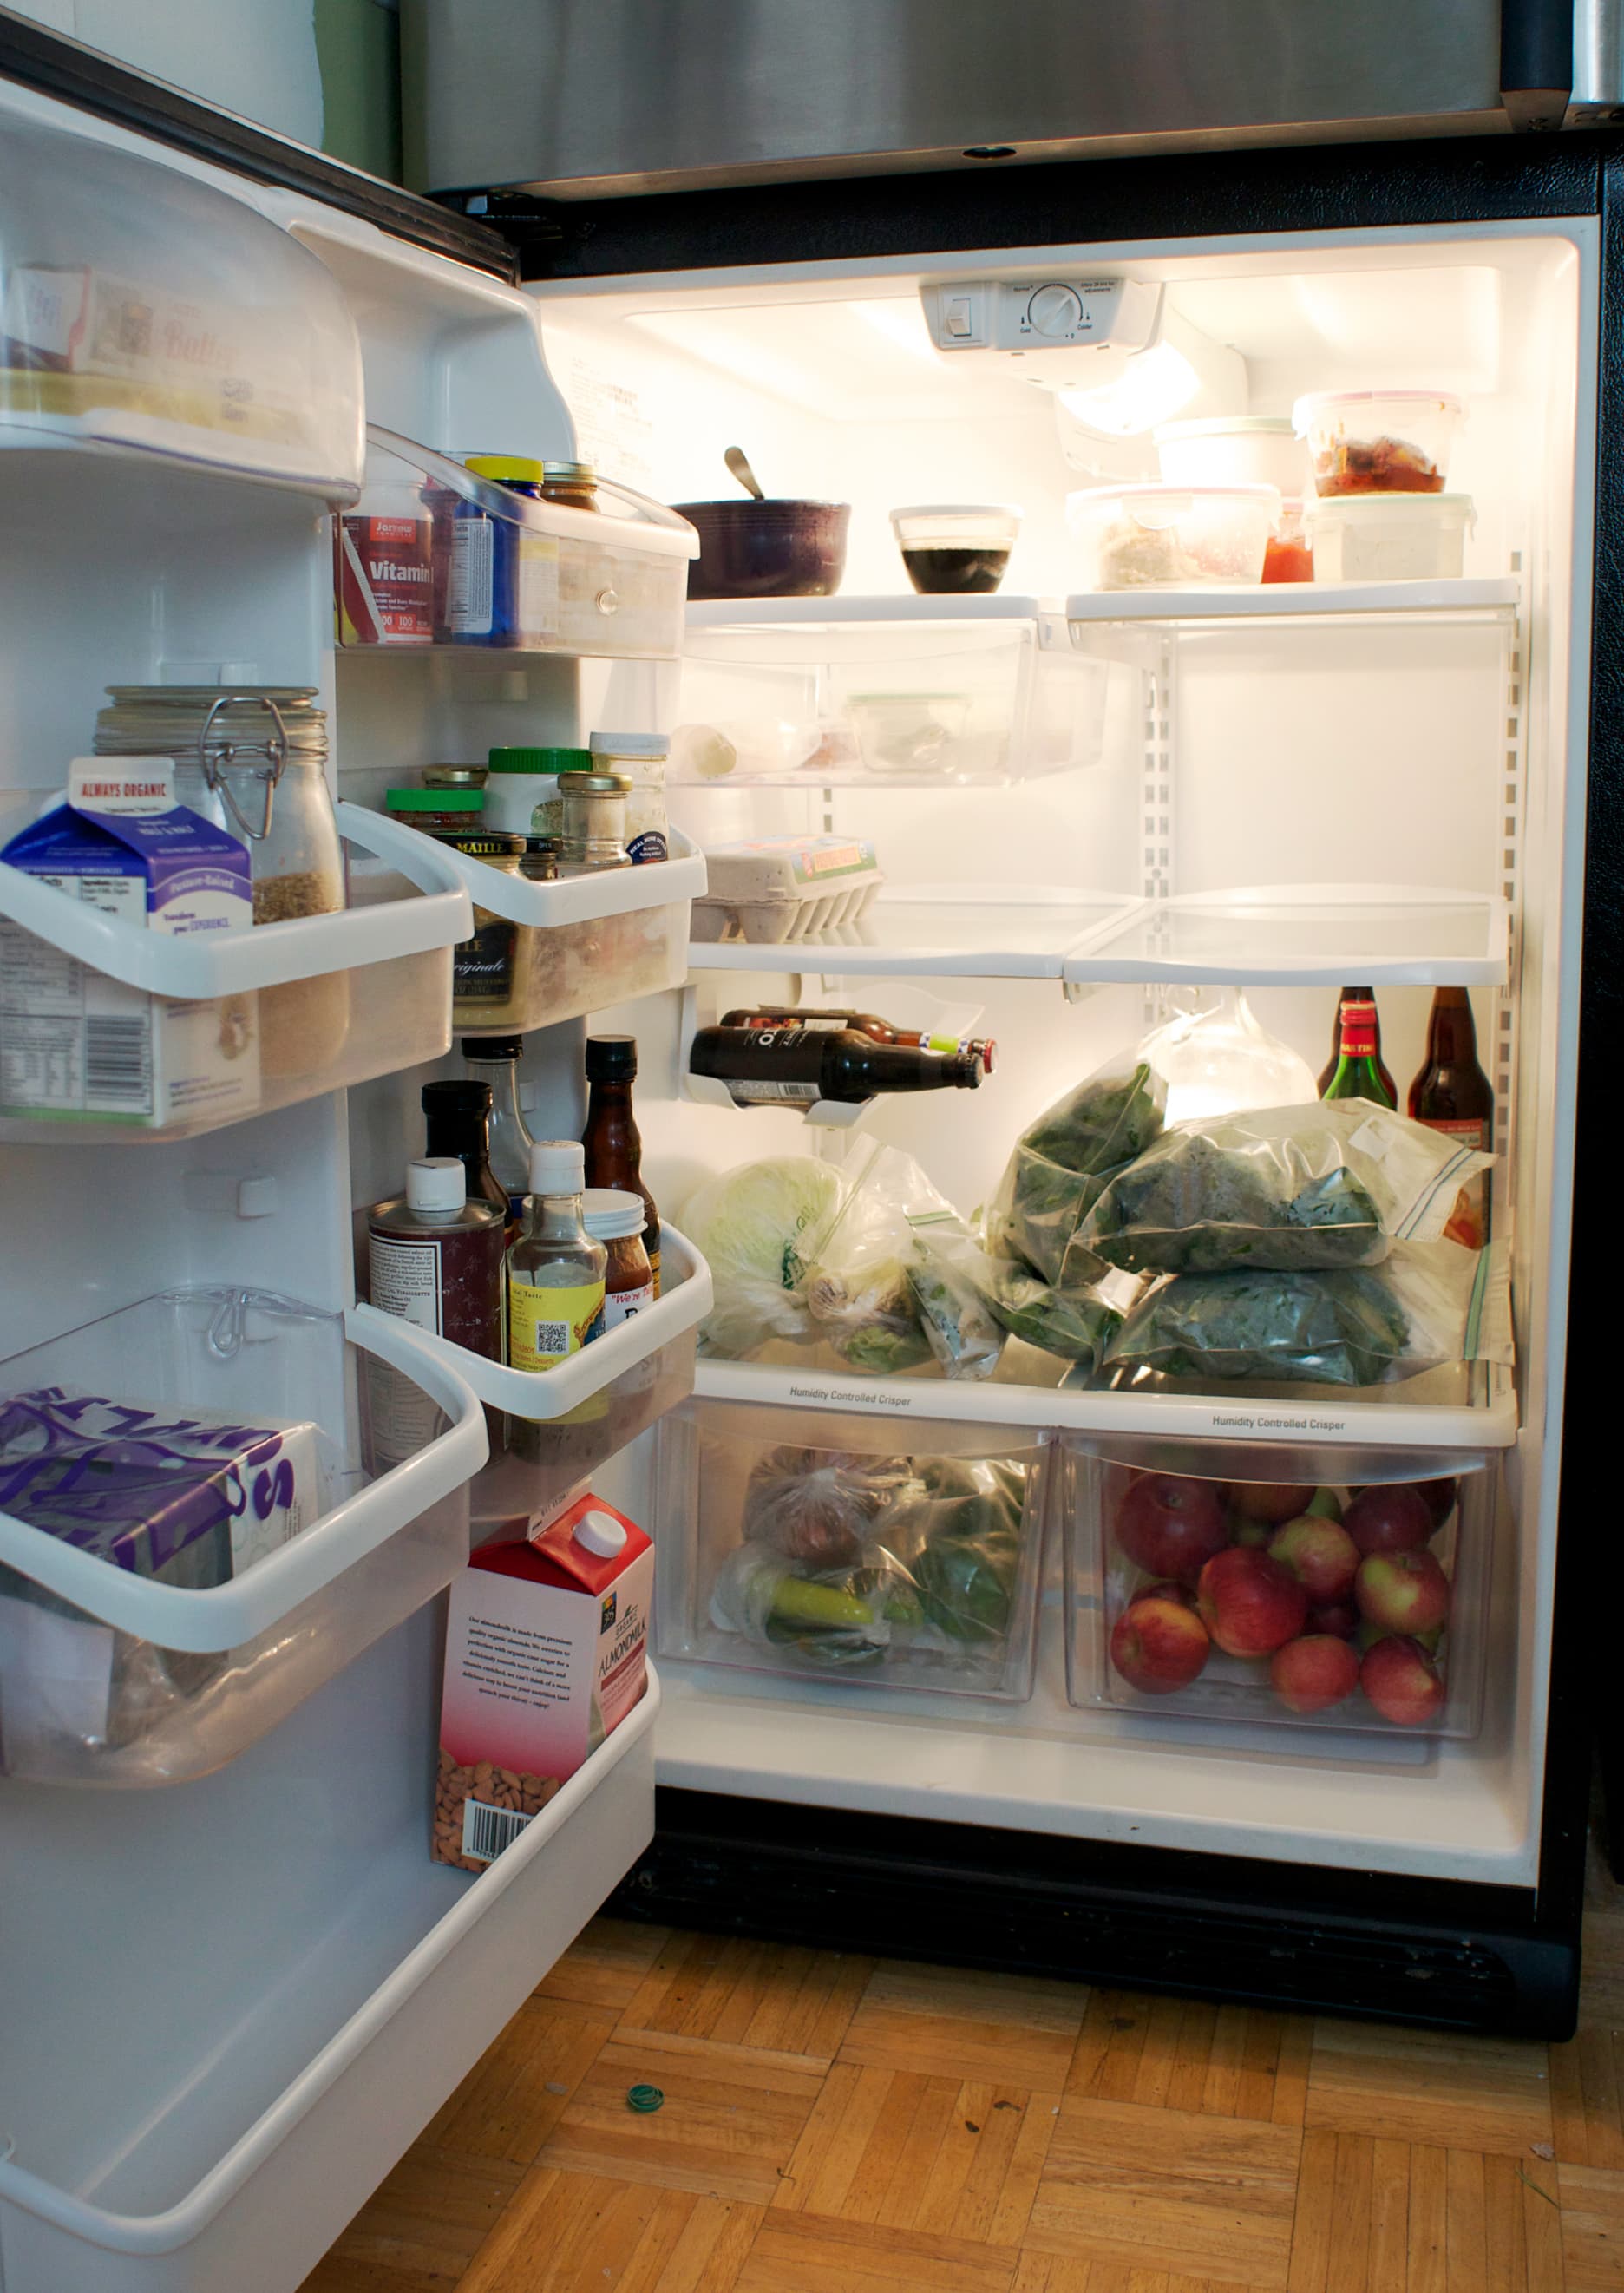 Organize Your Crowded Thanksgiving Fridge With Temporary Cardboard Shelves